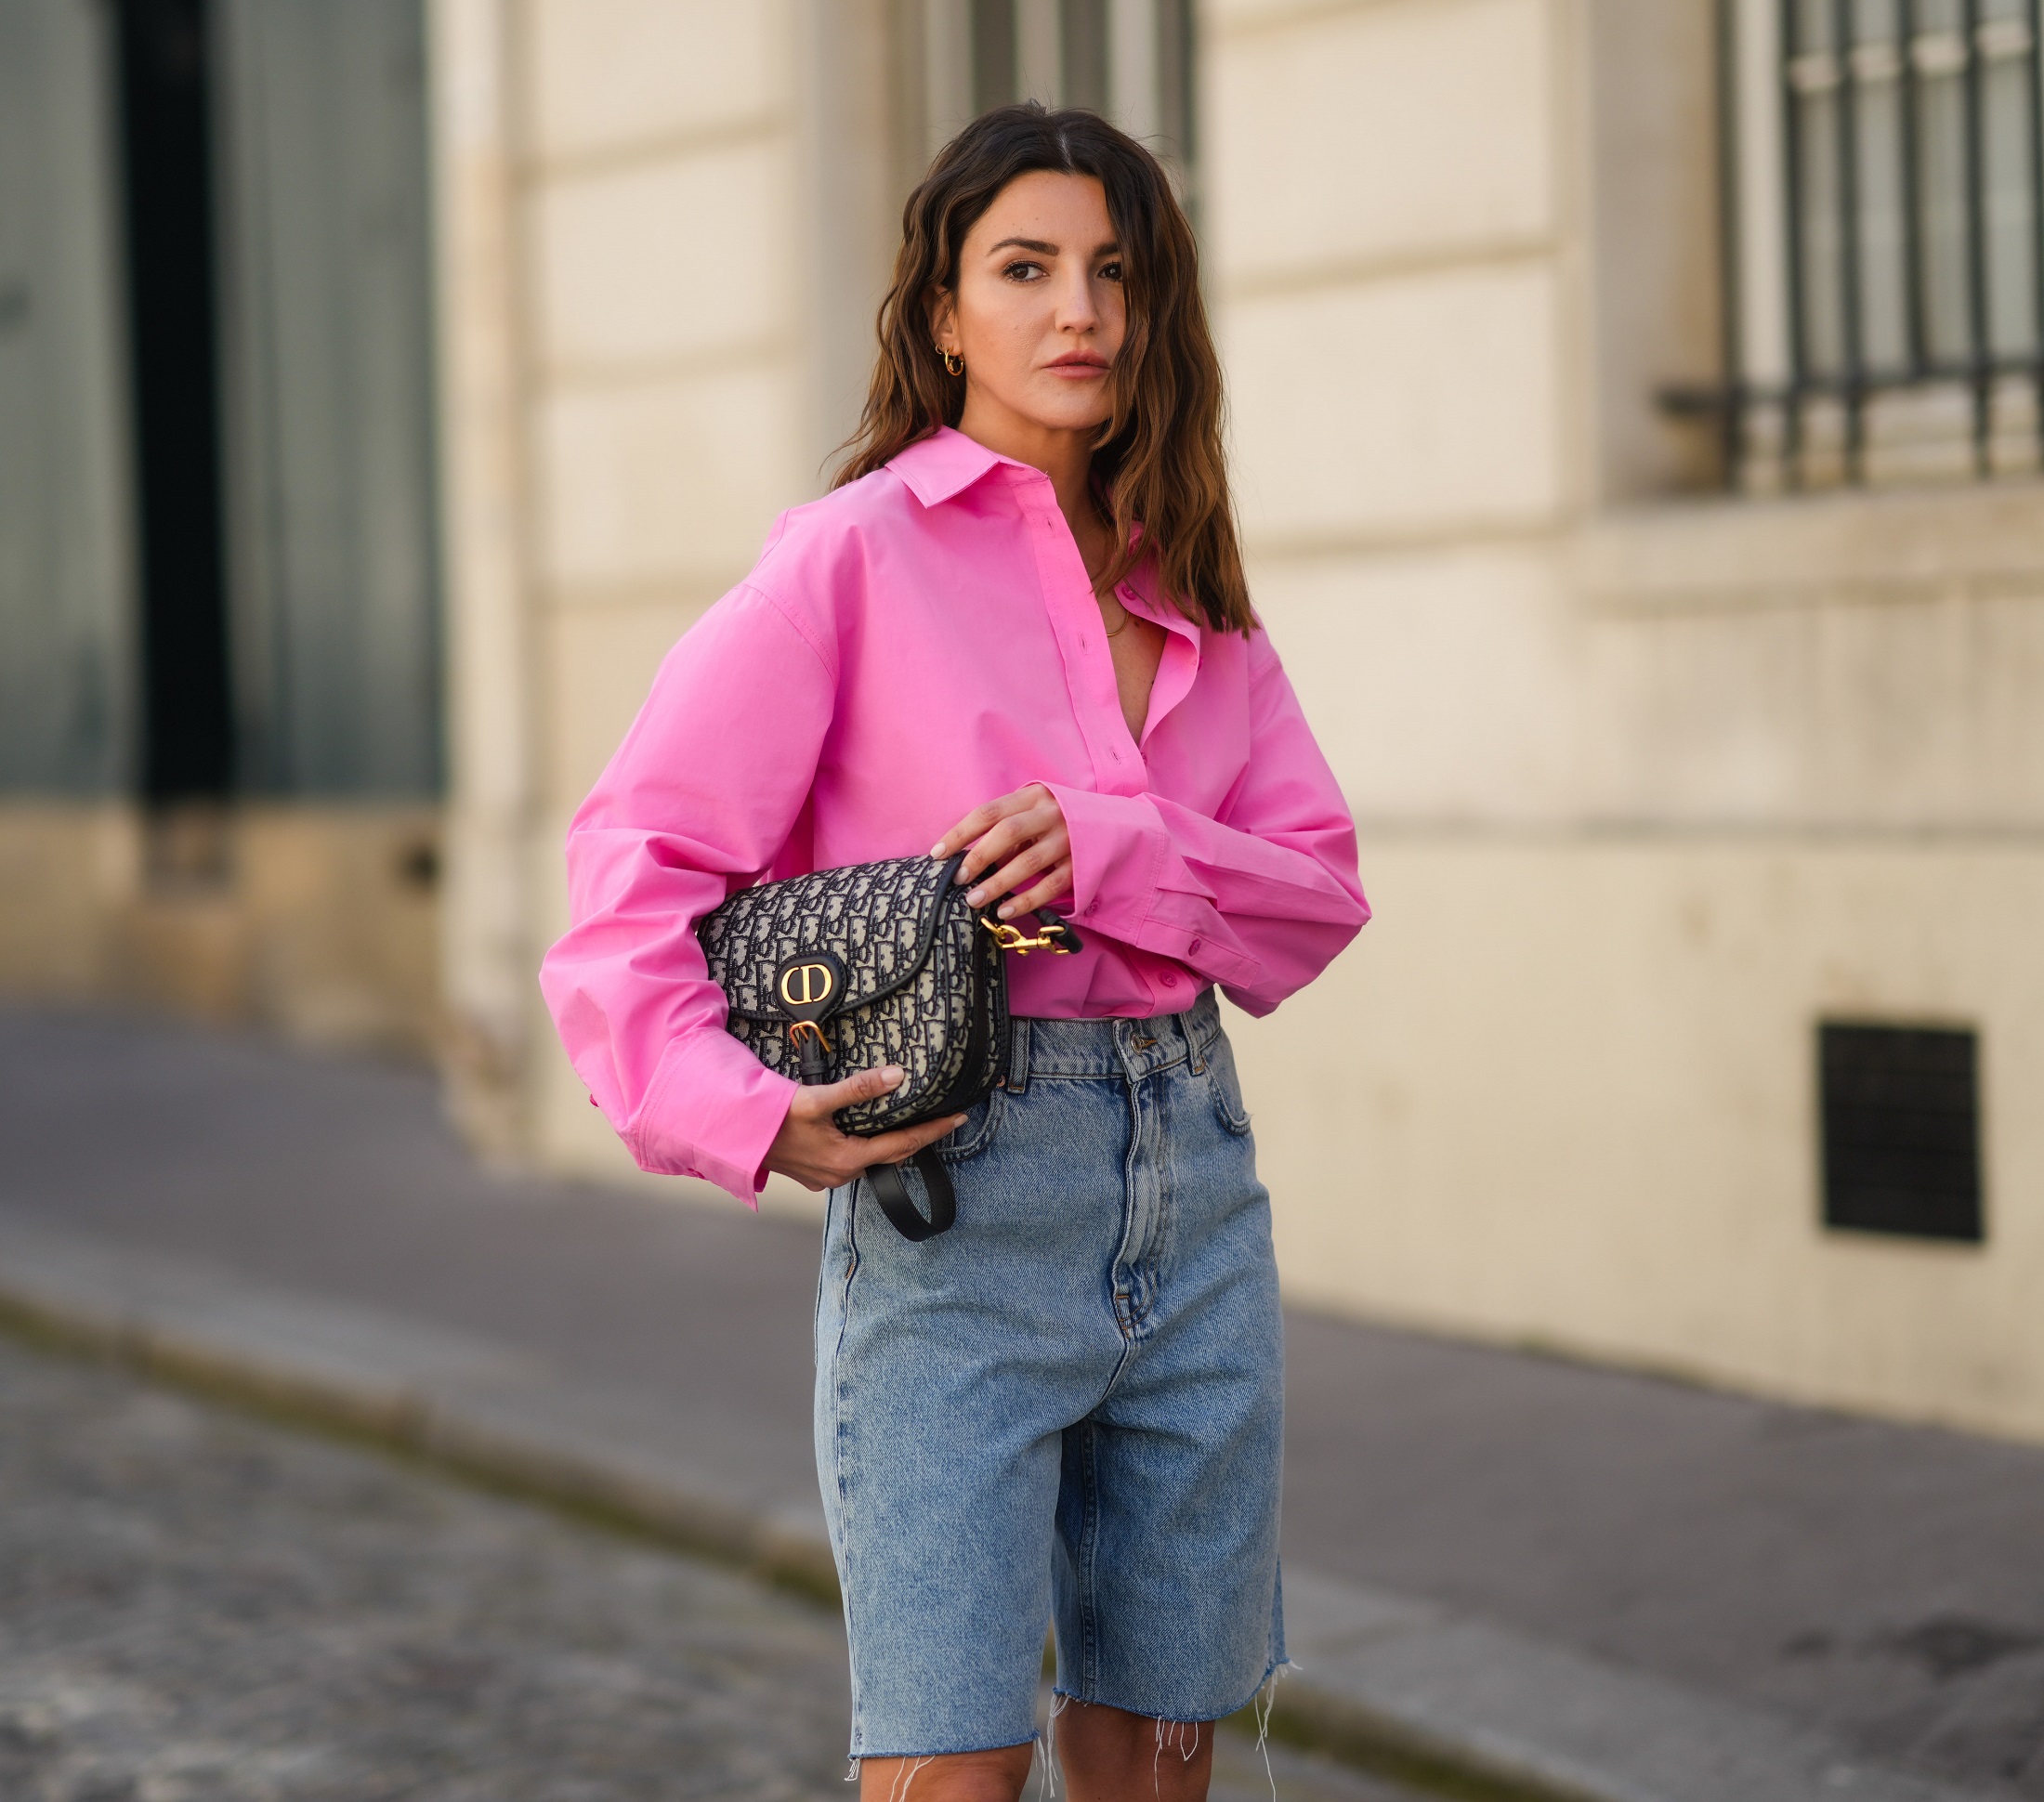 Pink is the new black. How to wear it without looking like a Barbie doll?